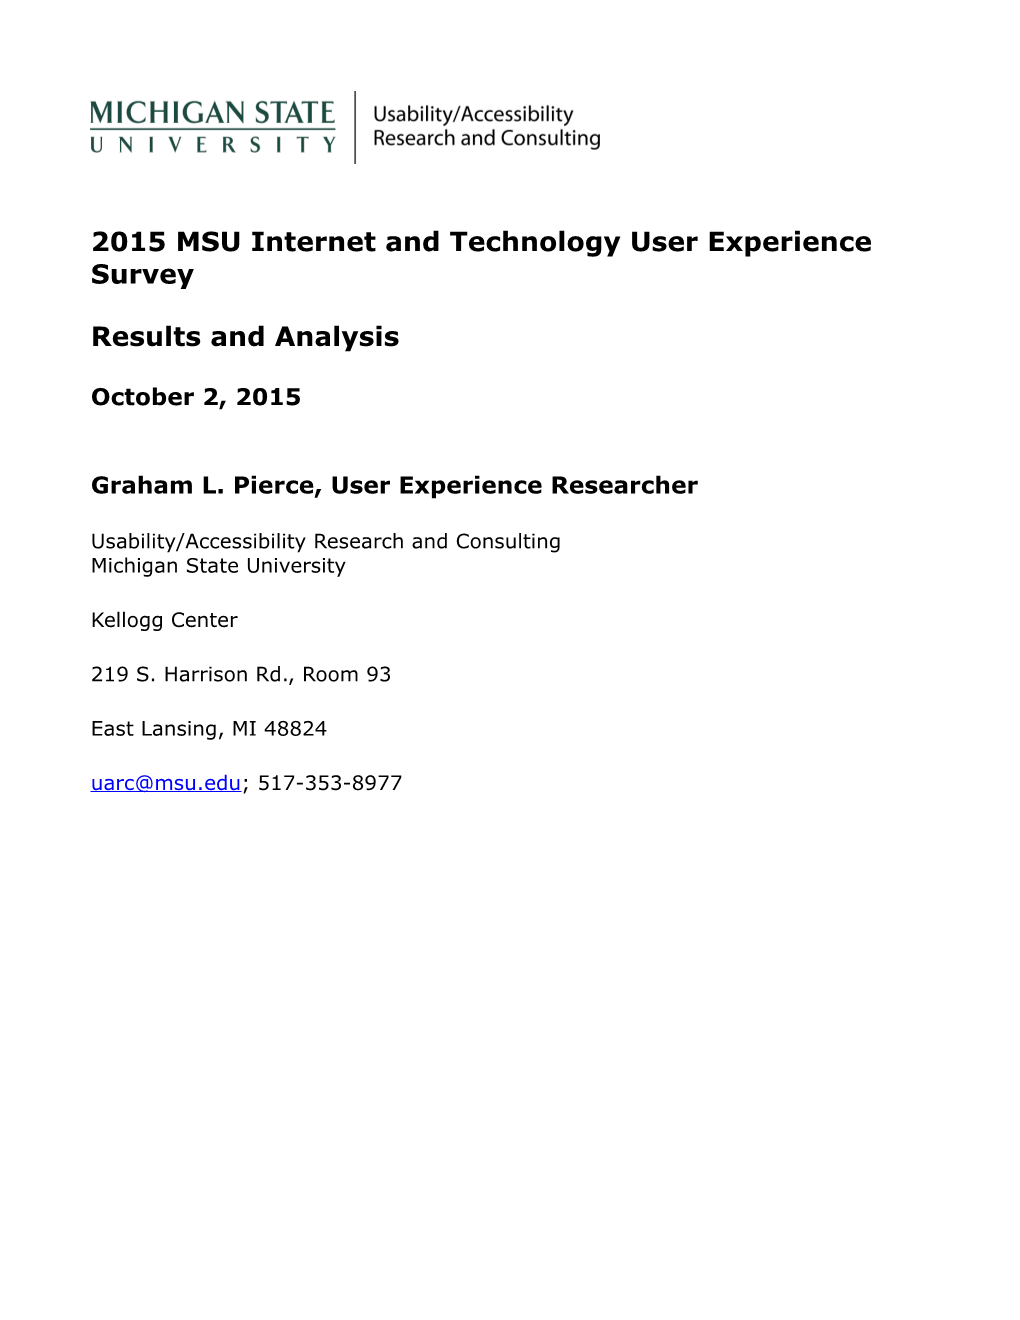 2015 MSU Internet and Technology User Experience Survey: Results and Analysis